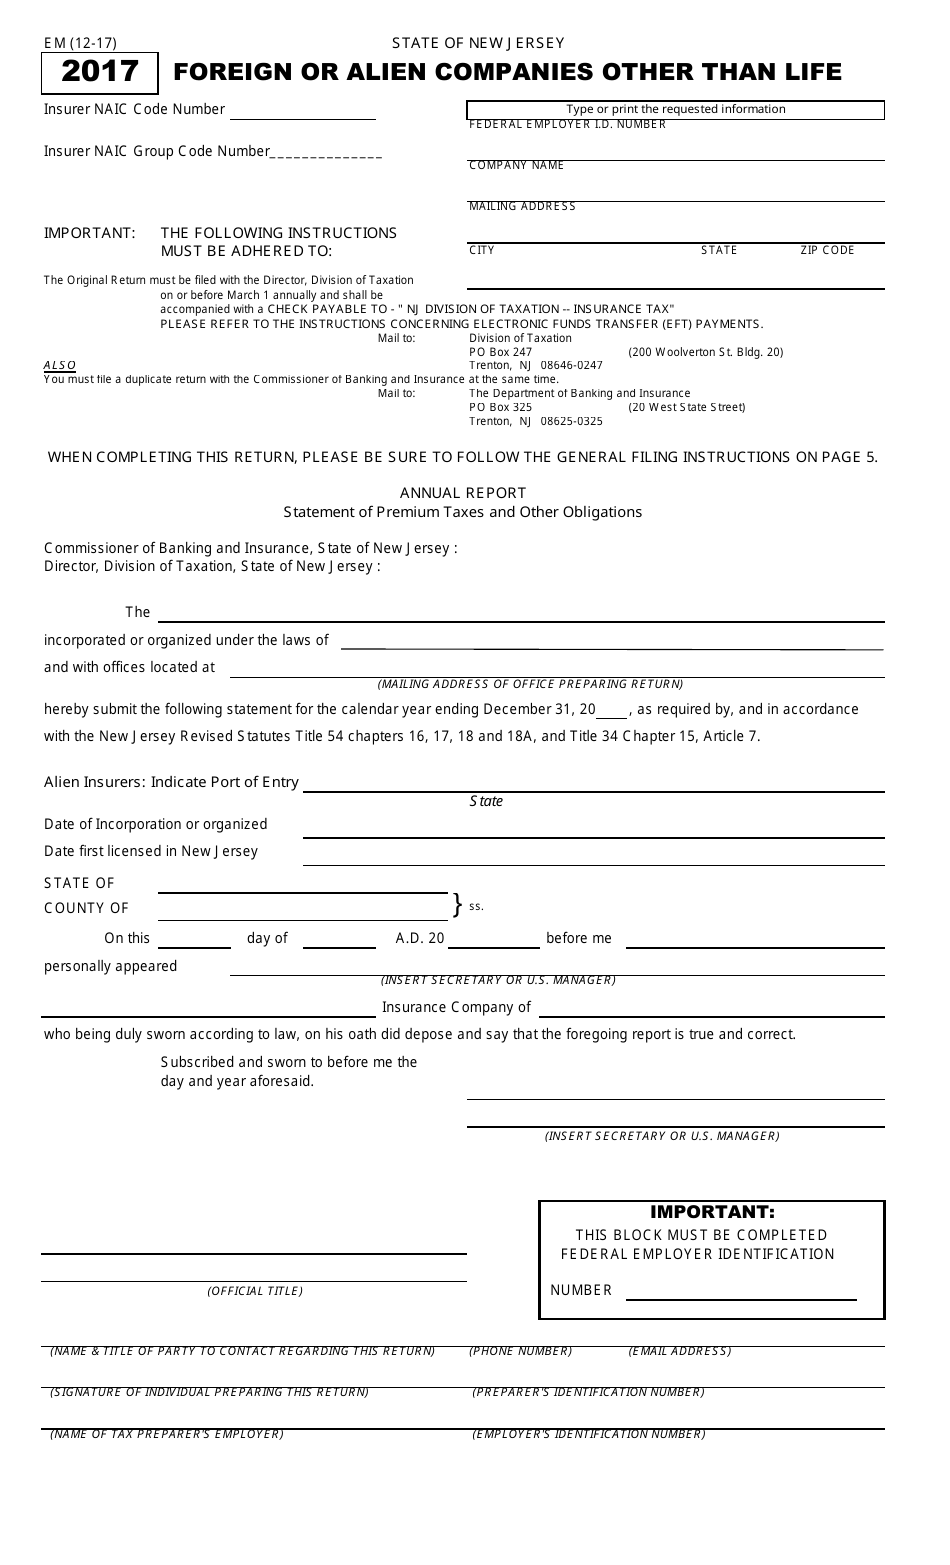 Form EM Foreign or Alien Companies Other Than Life - New Jersey, Page 1